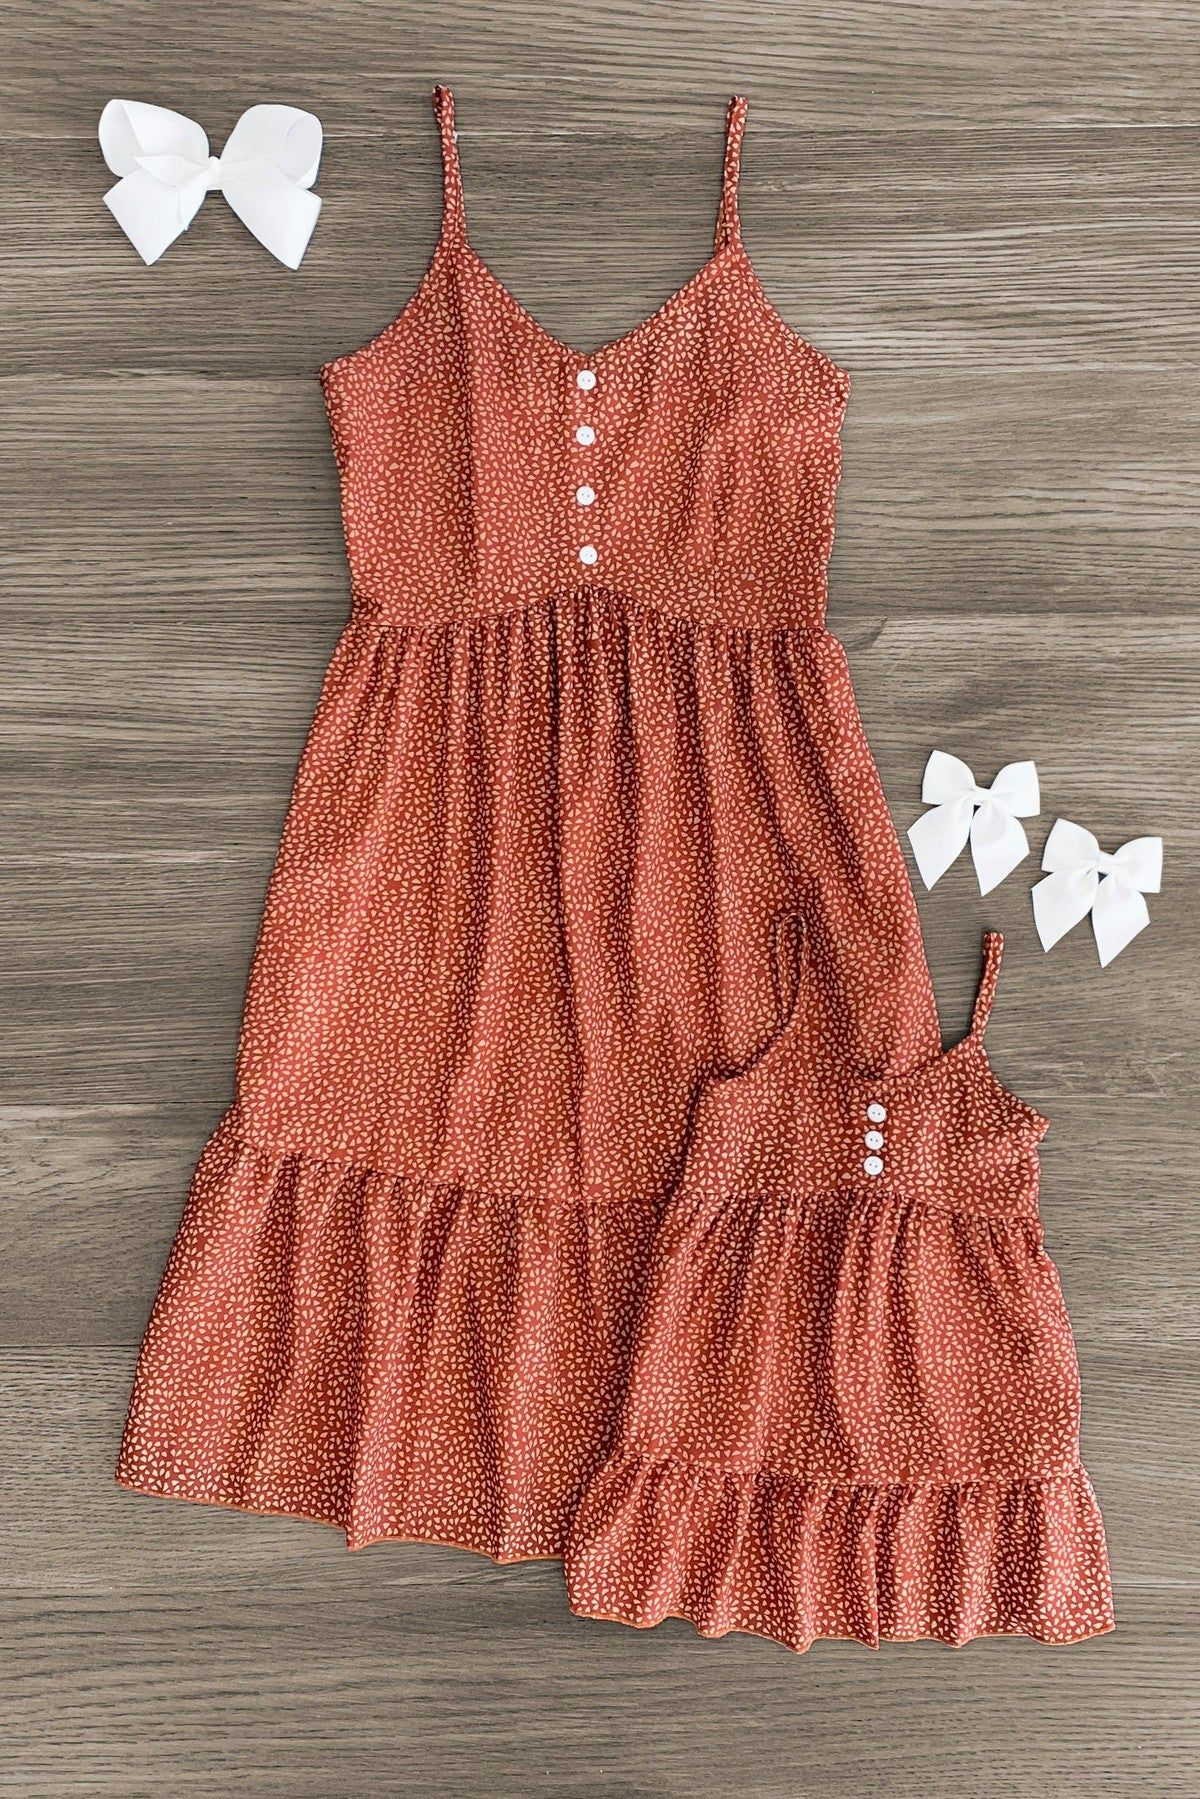 Mom & Me - Brown Sleeveless Dress | Sparkle In Pink